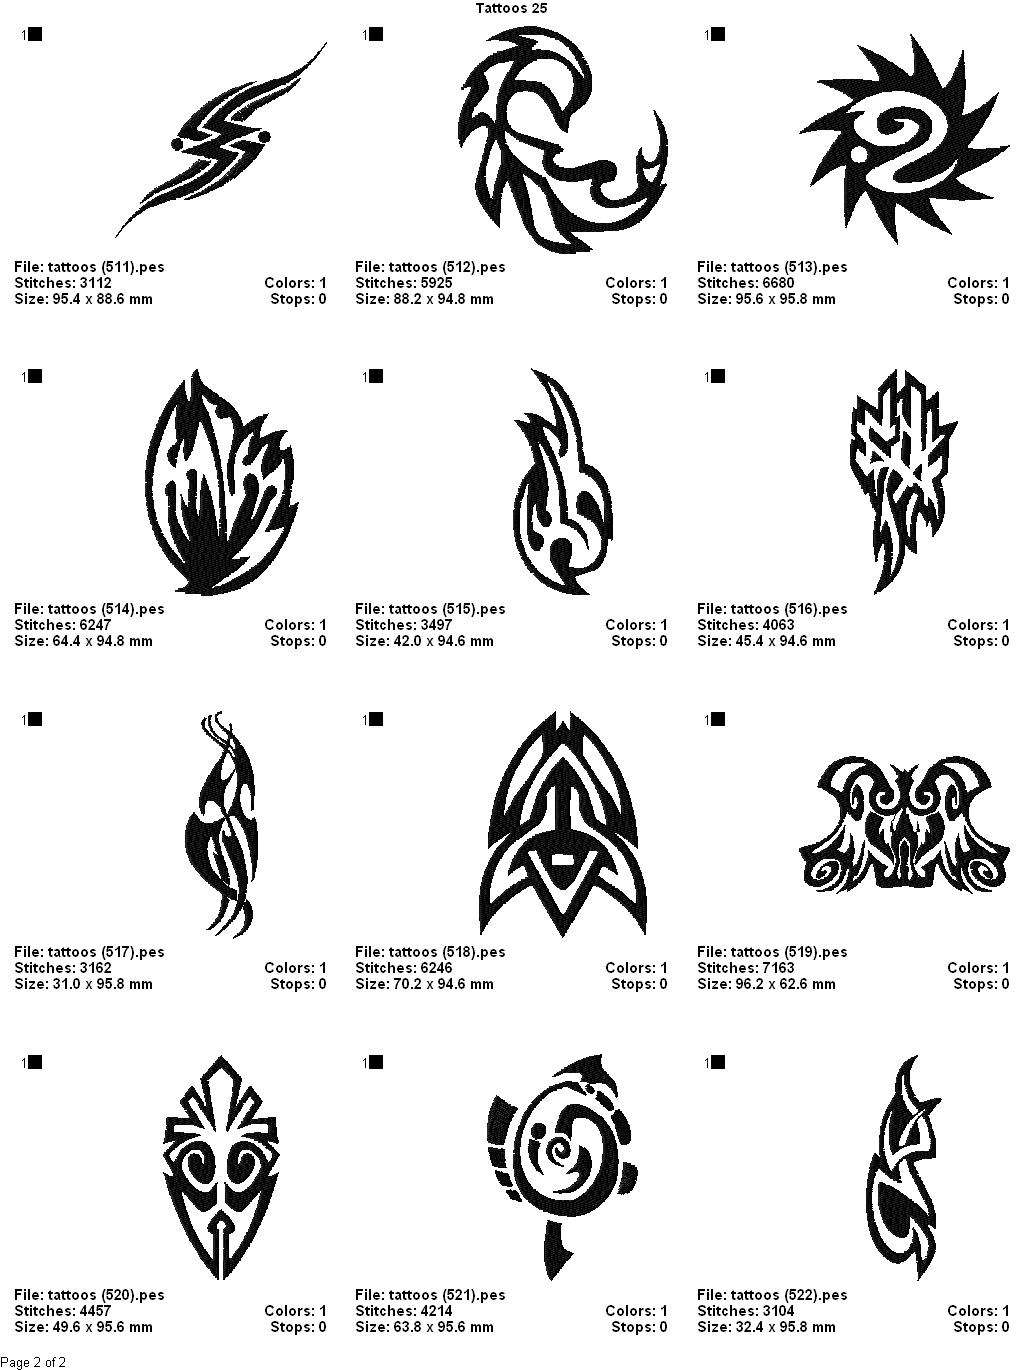 TATTOOS/ABSTRACT DESIGNS